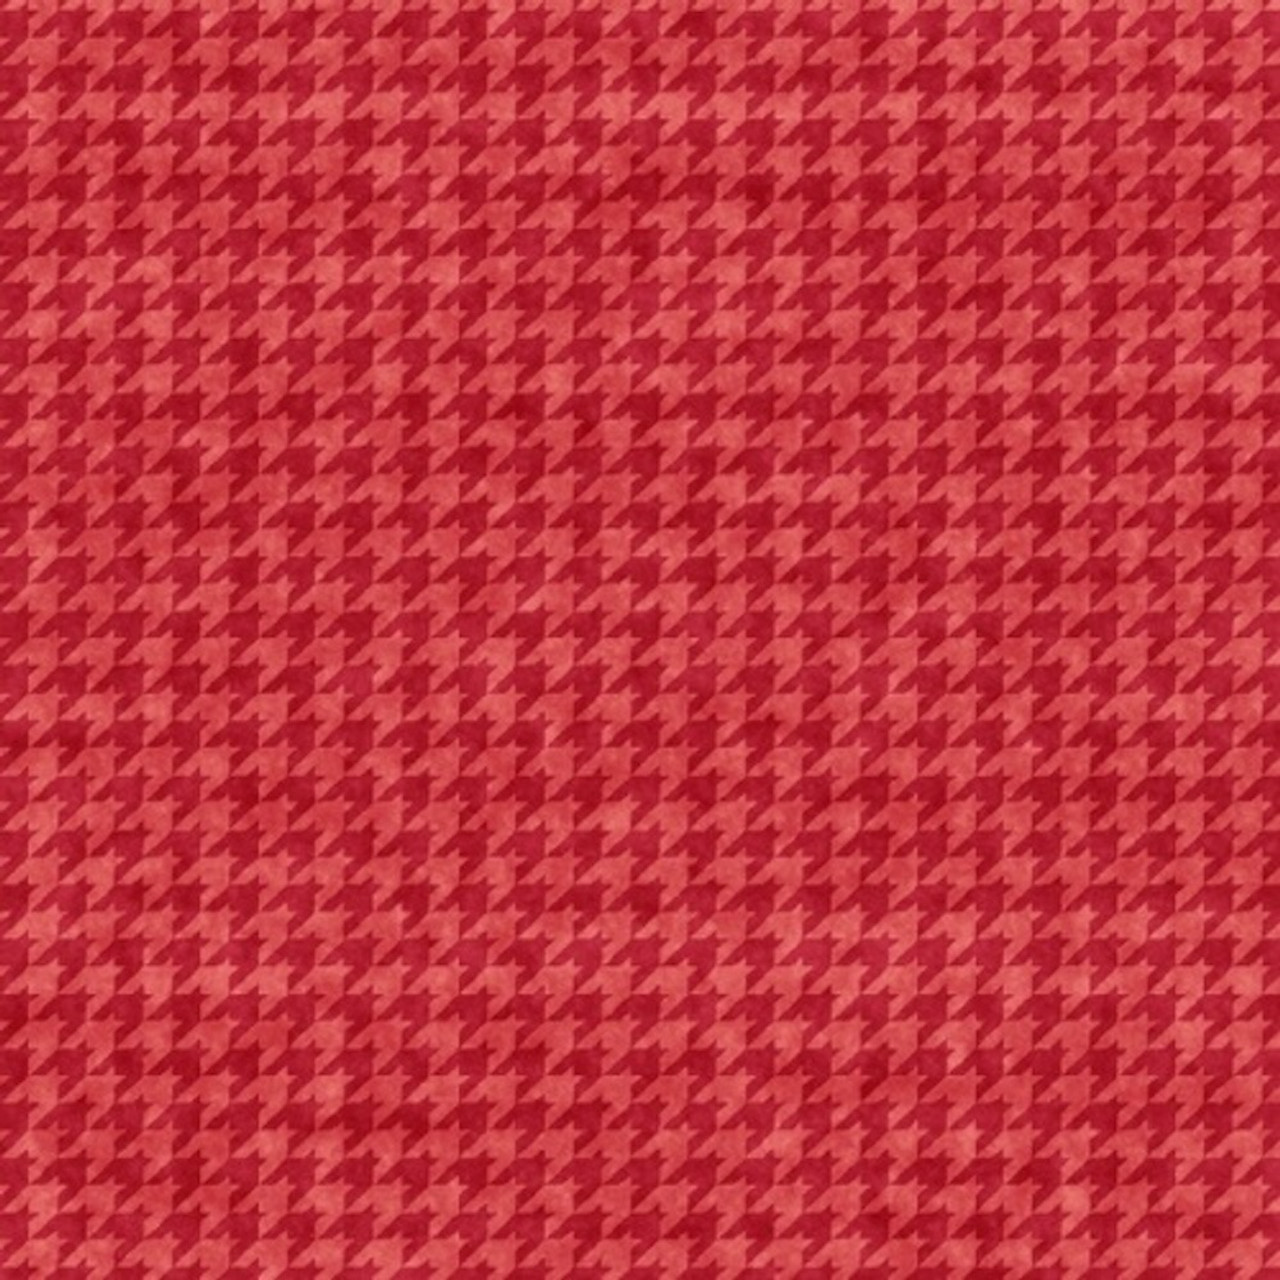 Henry Glass Houndstooth Basics Rose Cotton Fabric By The Yard